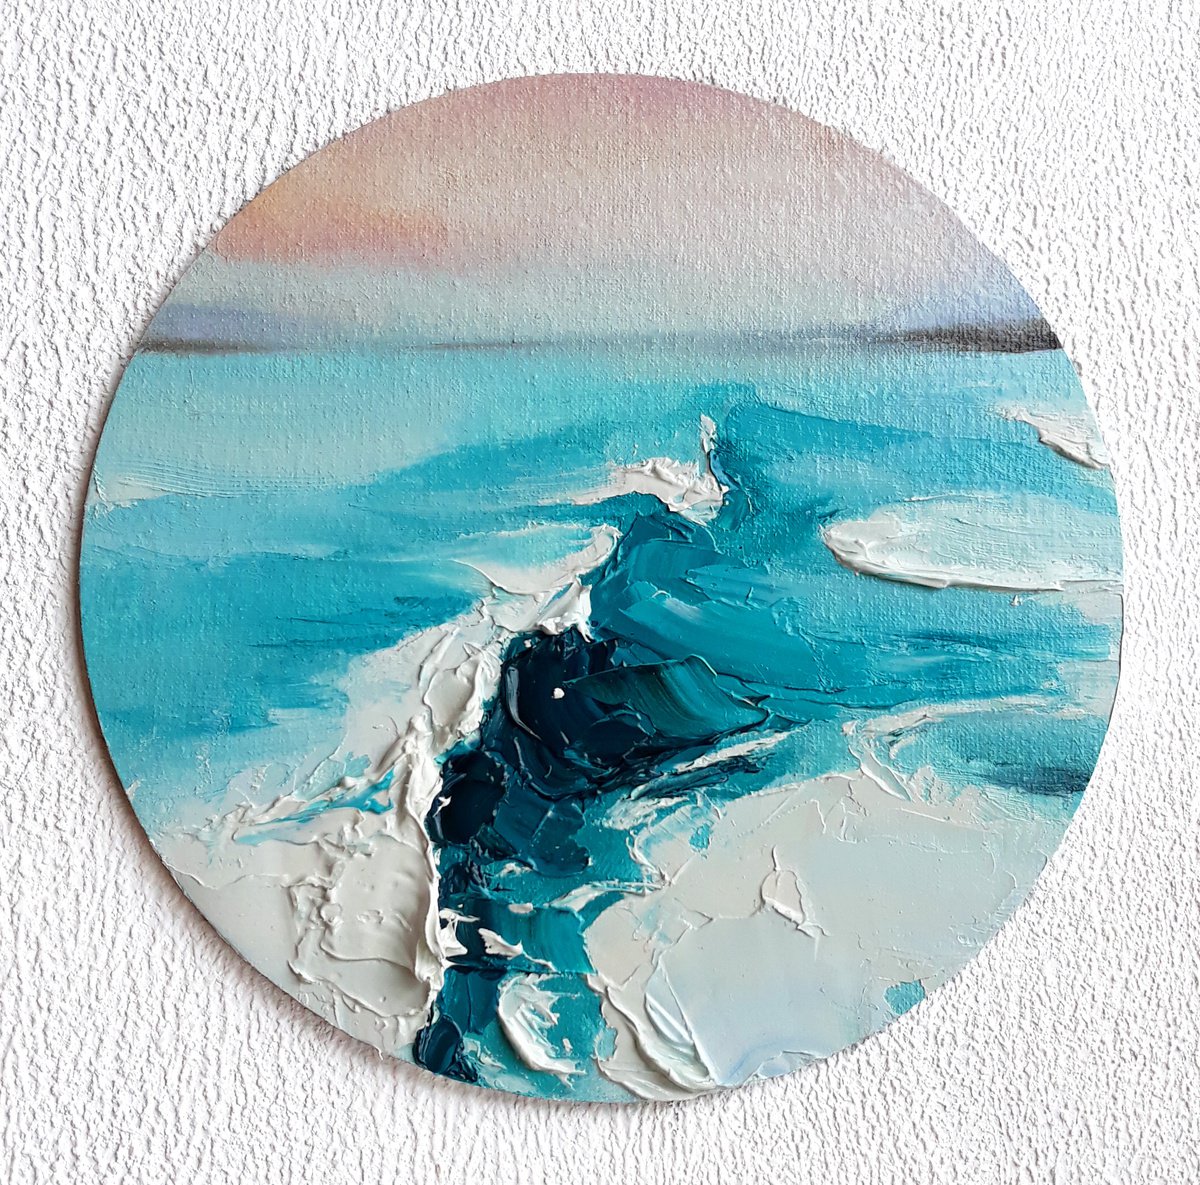 Abstract turquoise wave by Kateryna Somyk